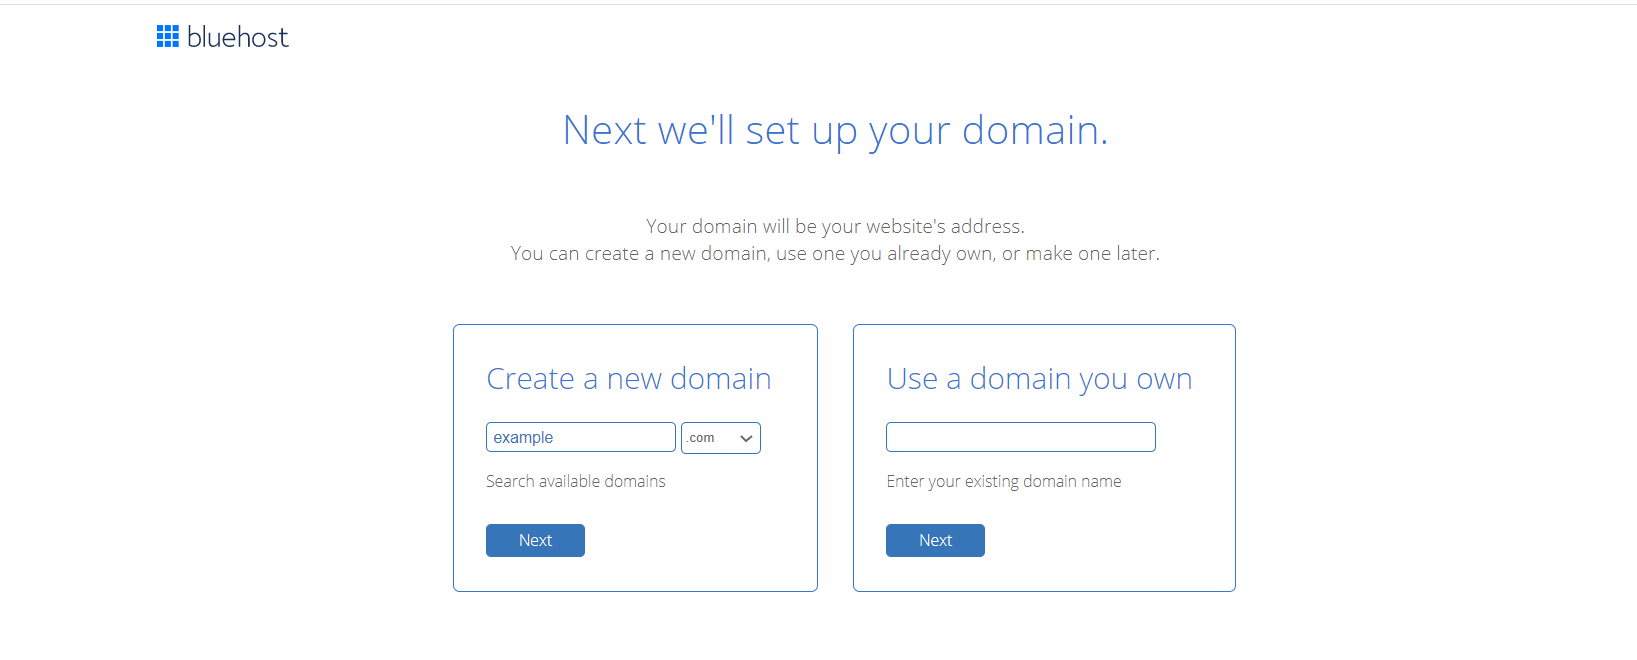 Choosing a domain name while signing up for Bluehost hosting.